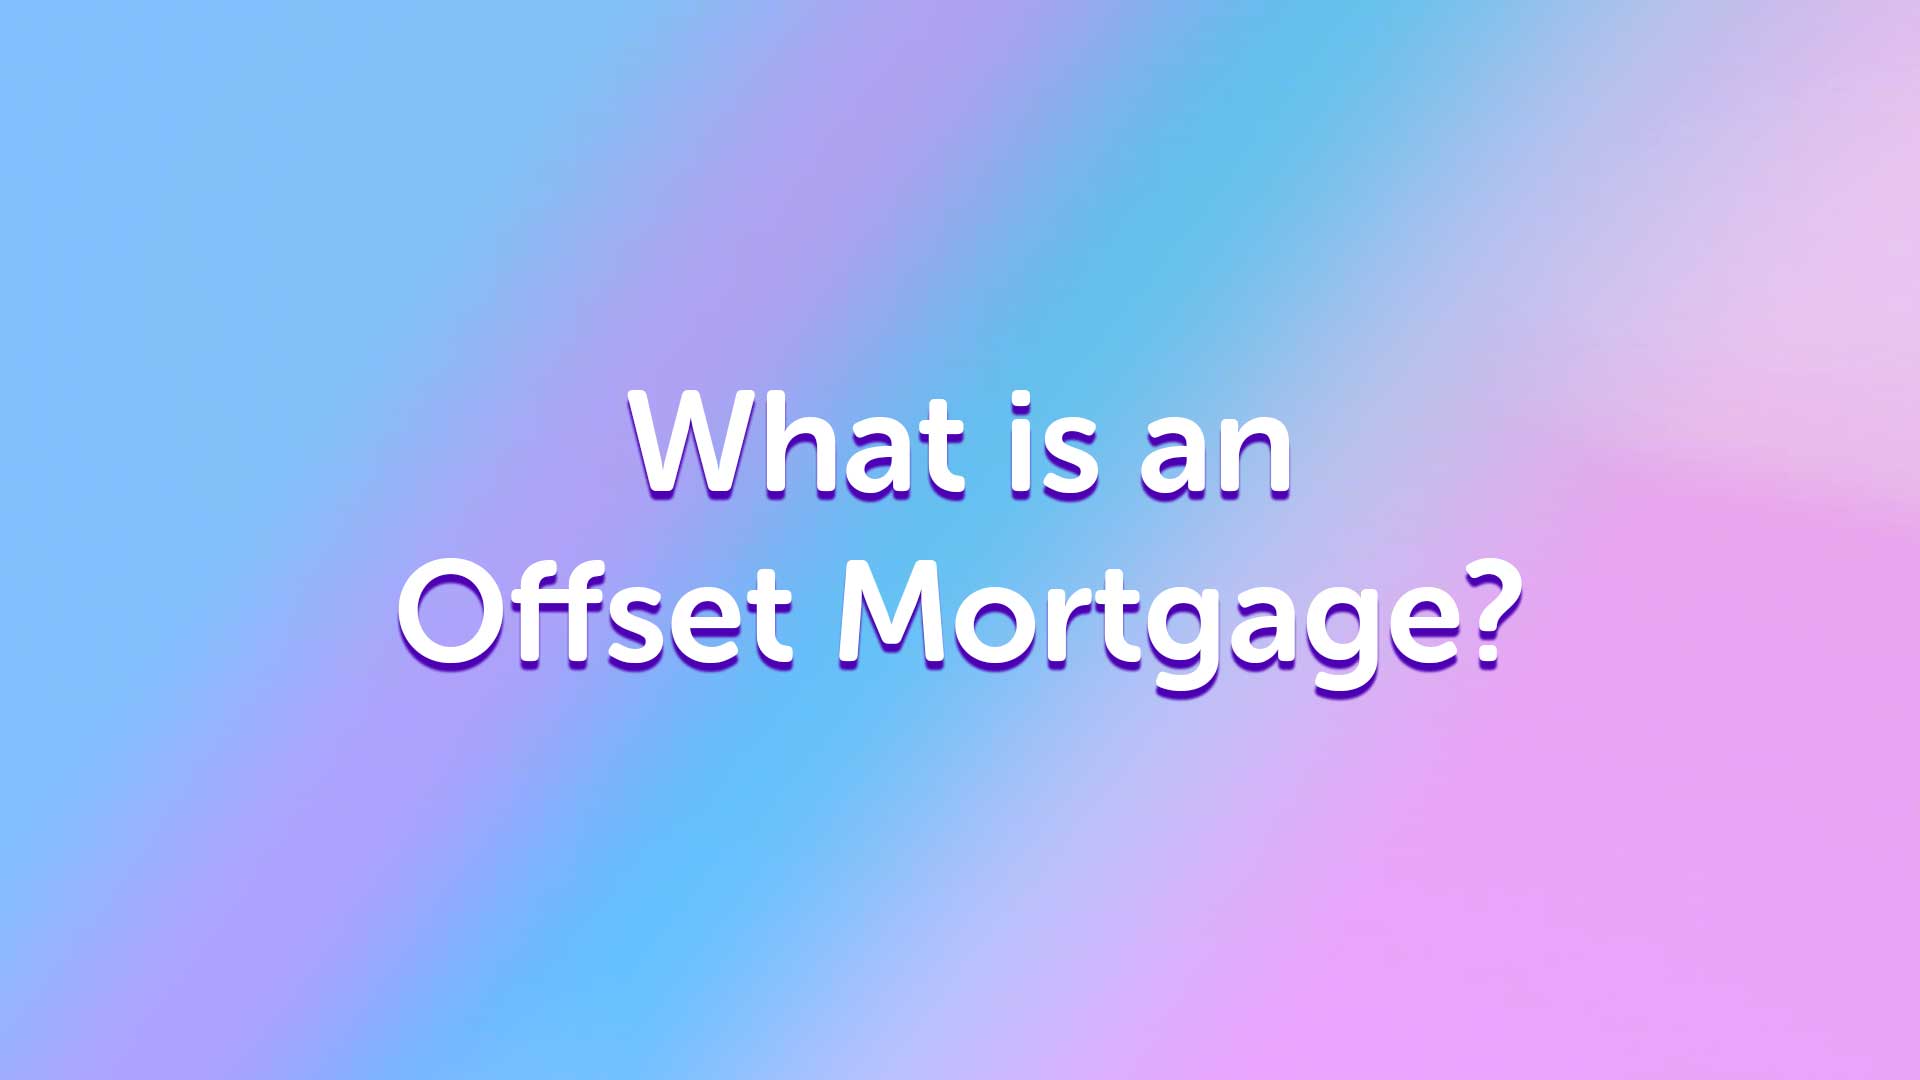 Offset Mortgage Advice in Doncaster | Doncastermoneyman